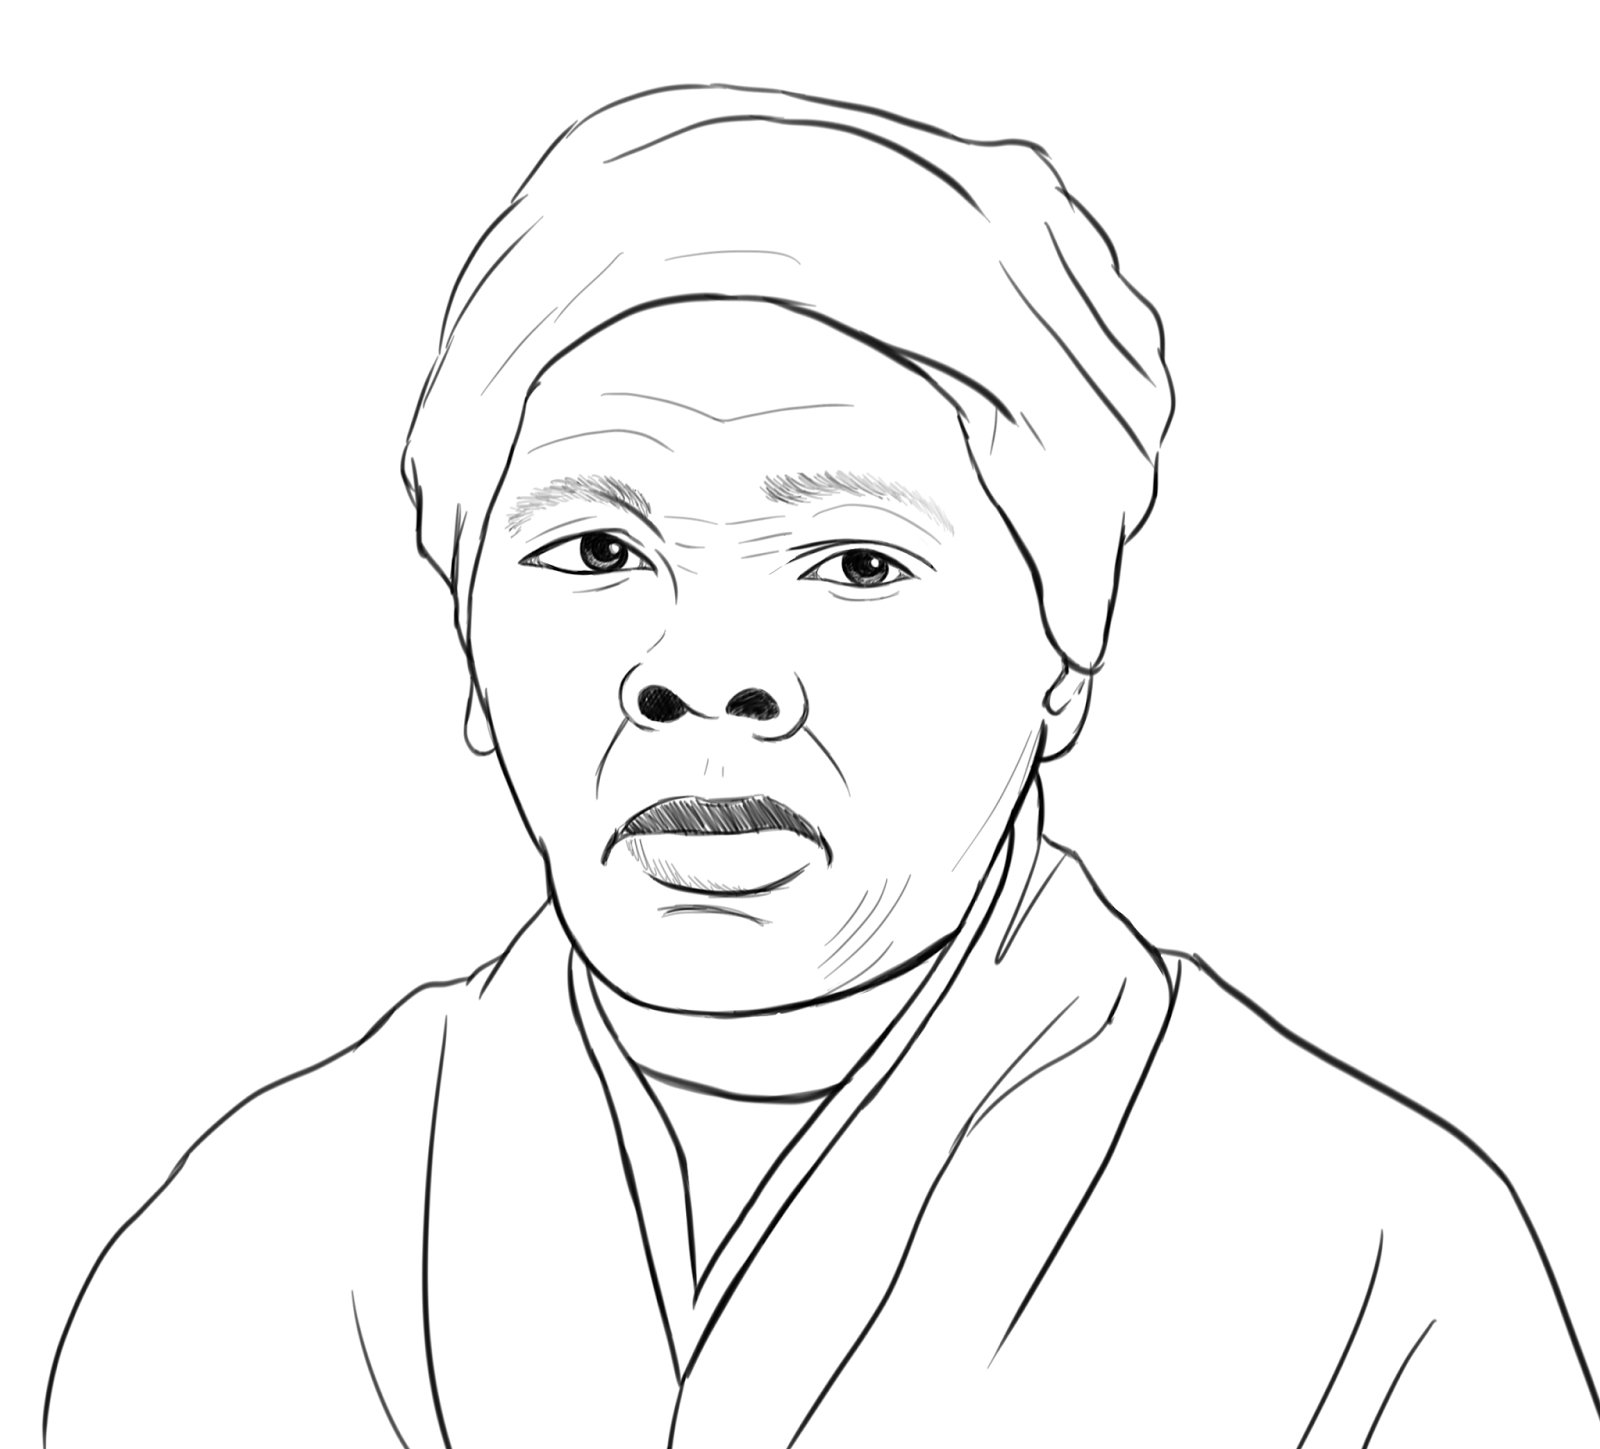 Harriet Tubman Coloring Page Coloring Home